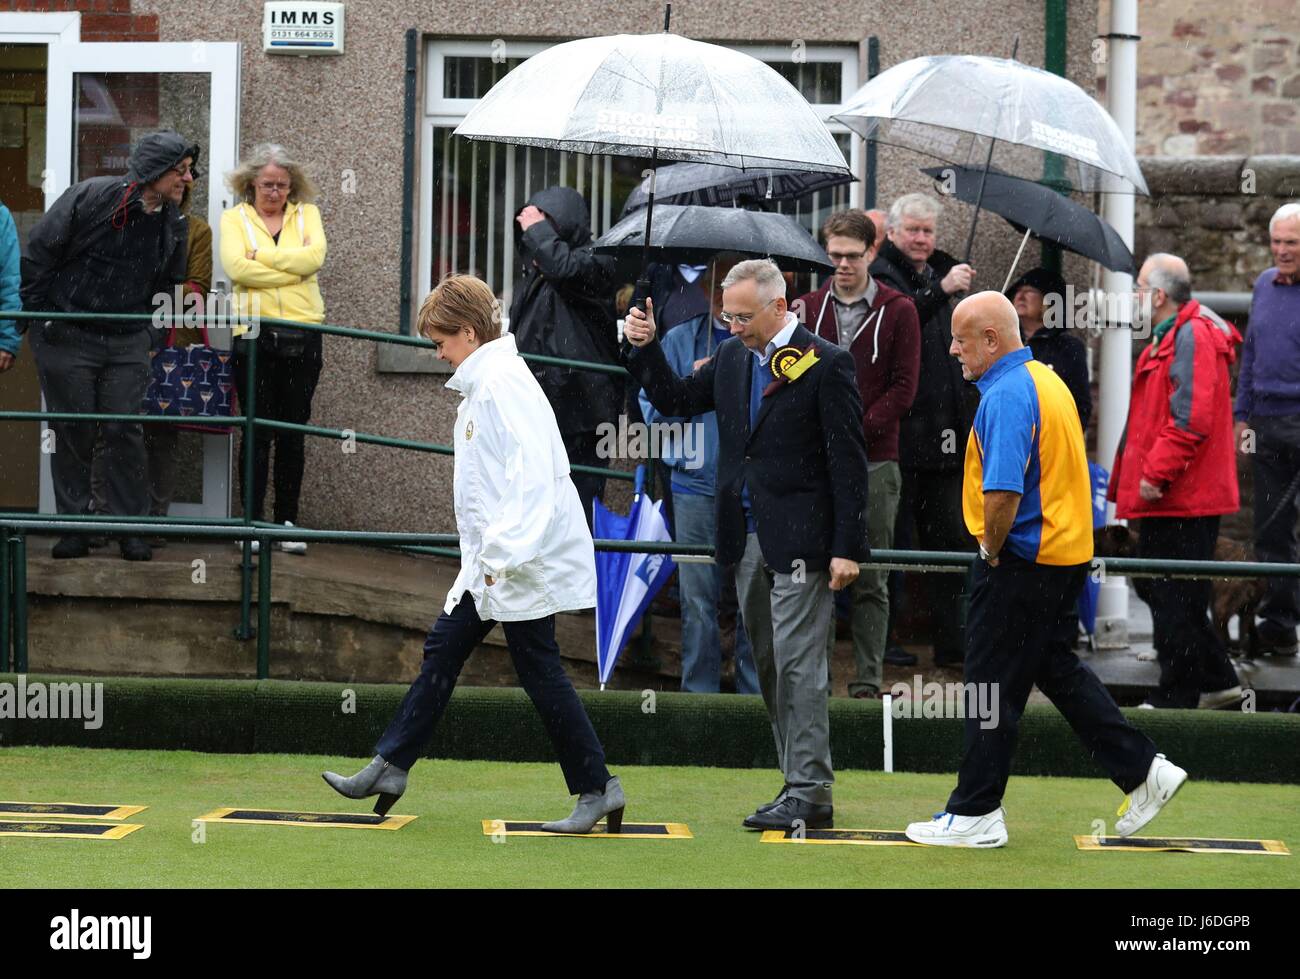 First Minister and SNP leader Nicola Sturgeon walks off the green after throwing a bowl during a visit to the Liberton Bowling Club in Edinburgh South as part of the party's General Election campaign trail. Stock Photo